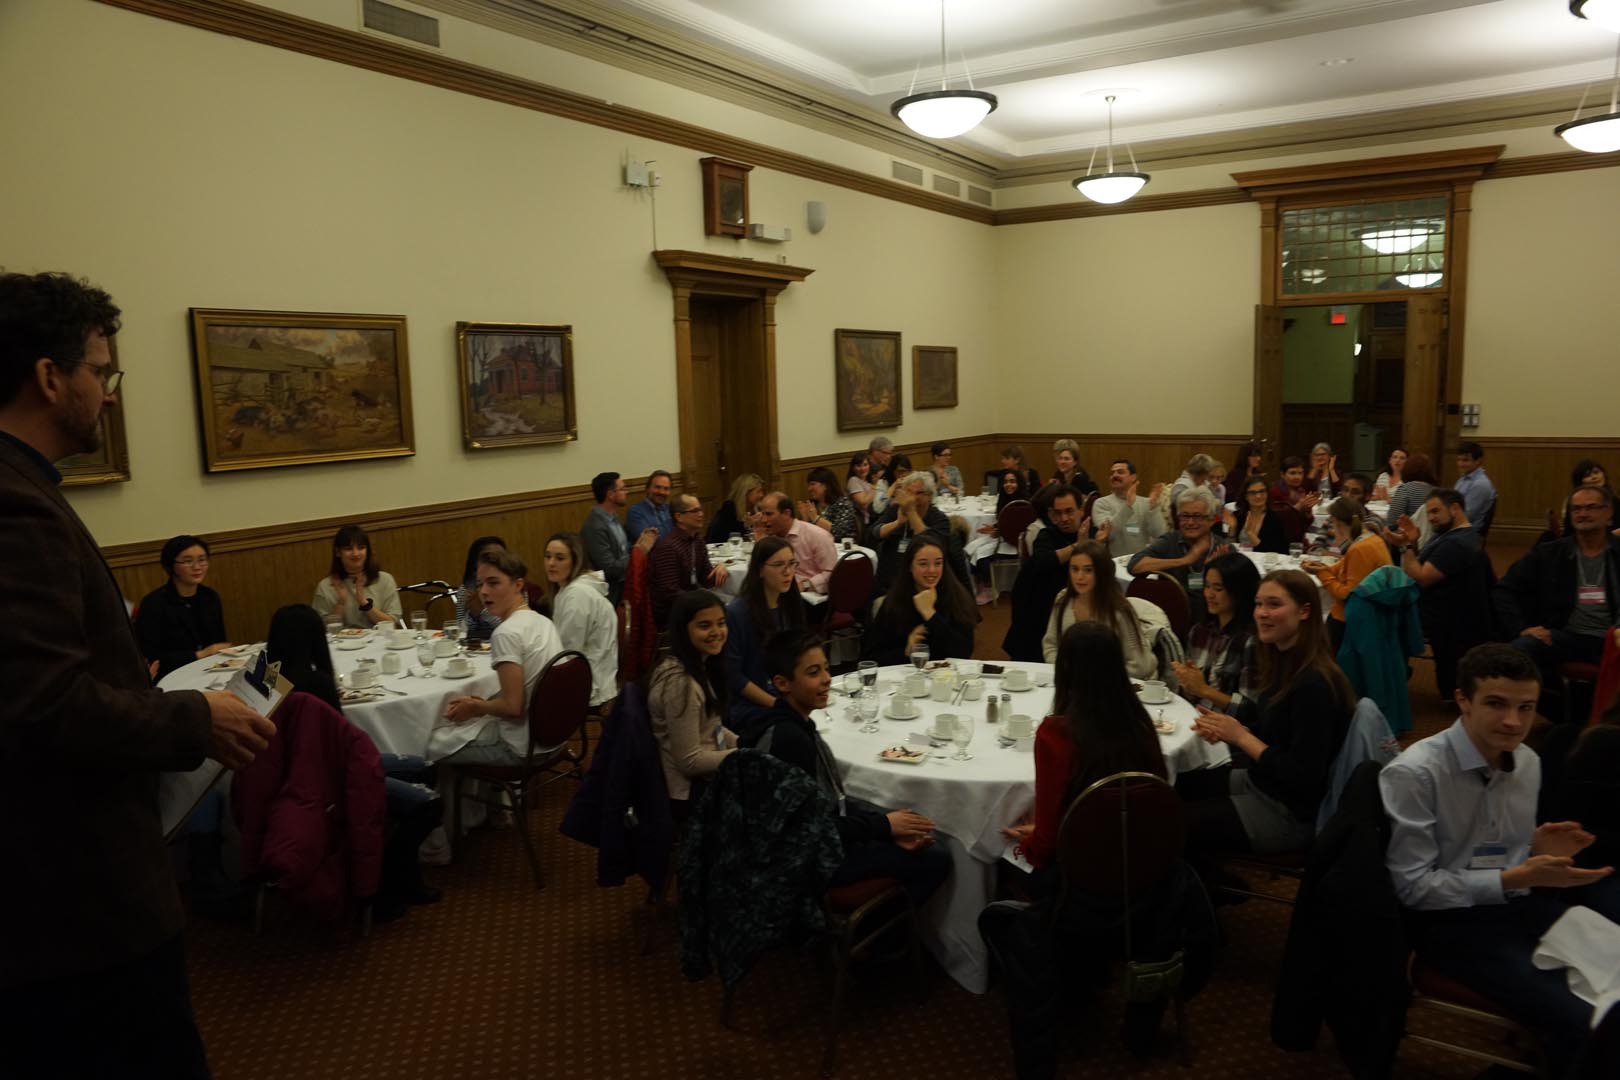 Our 24 finalists, their teachers, and poets from across Canada gather for dinner on the opening night of the 2018 Poetry In Voice National Finals.